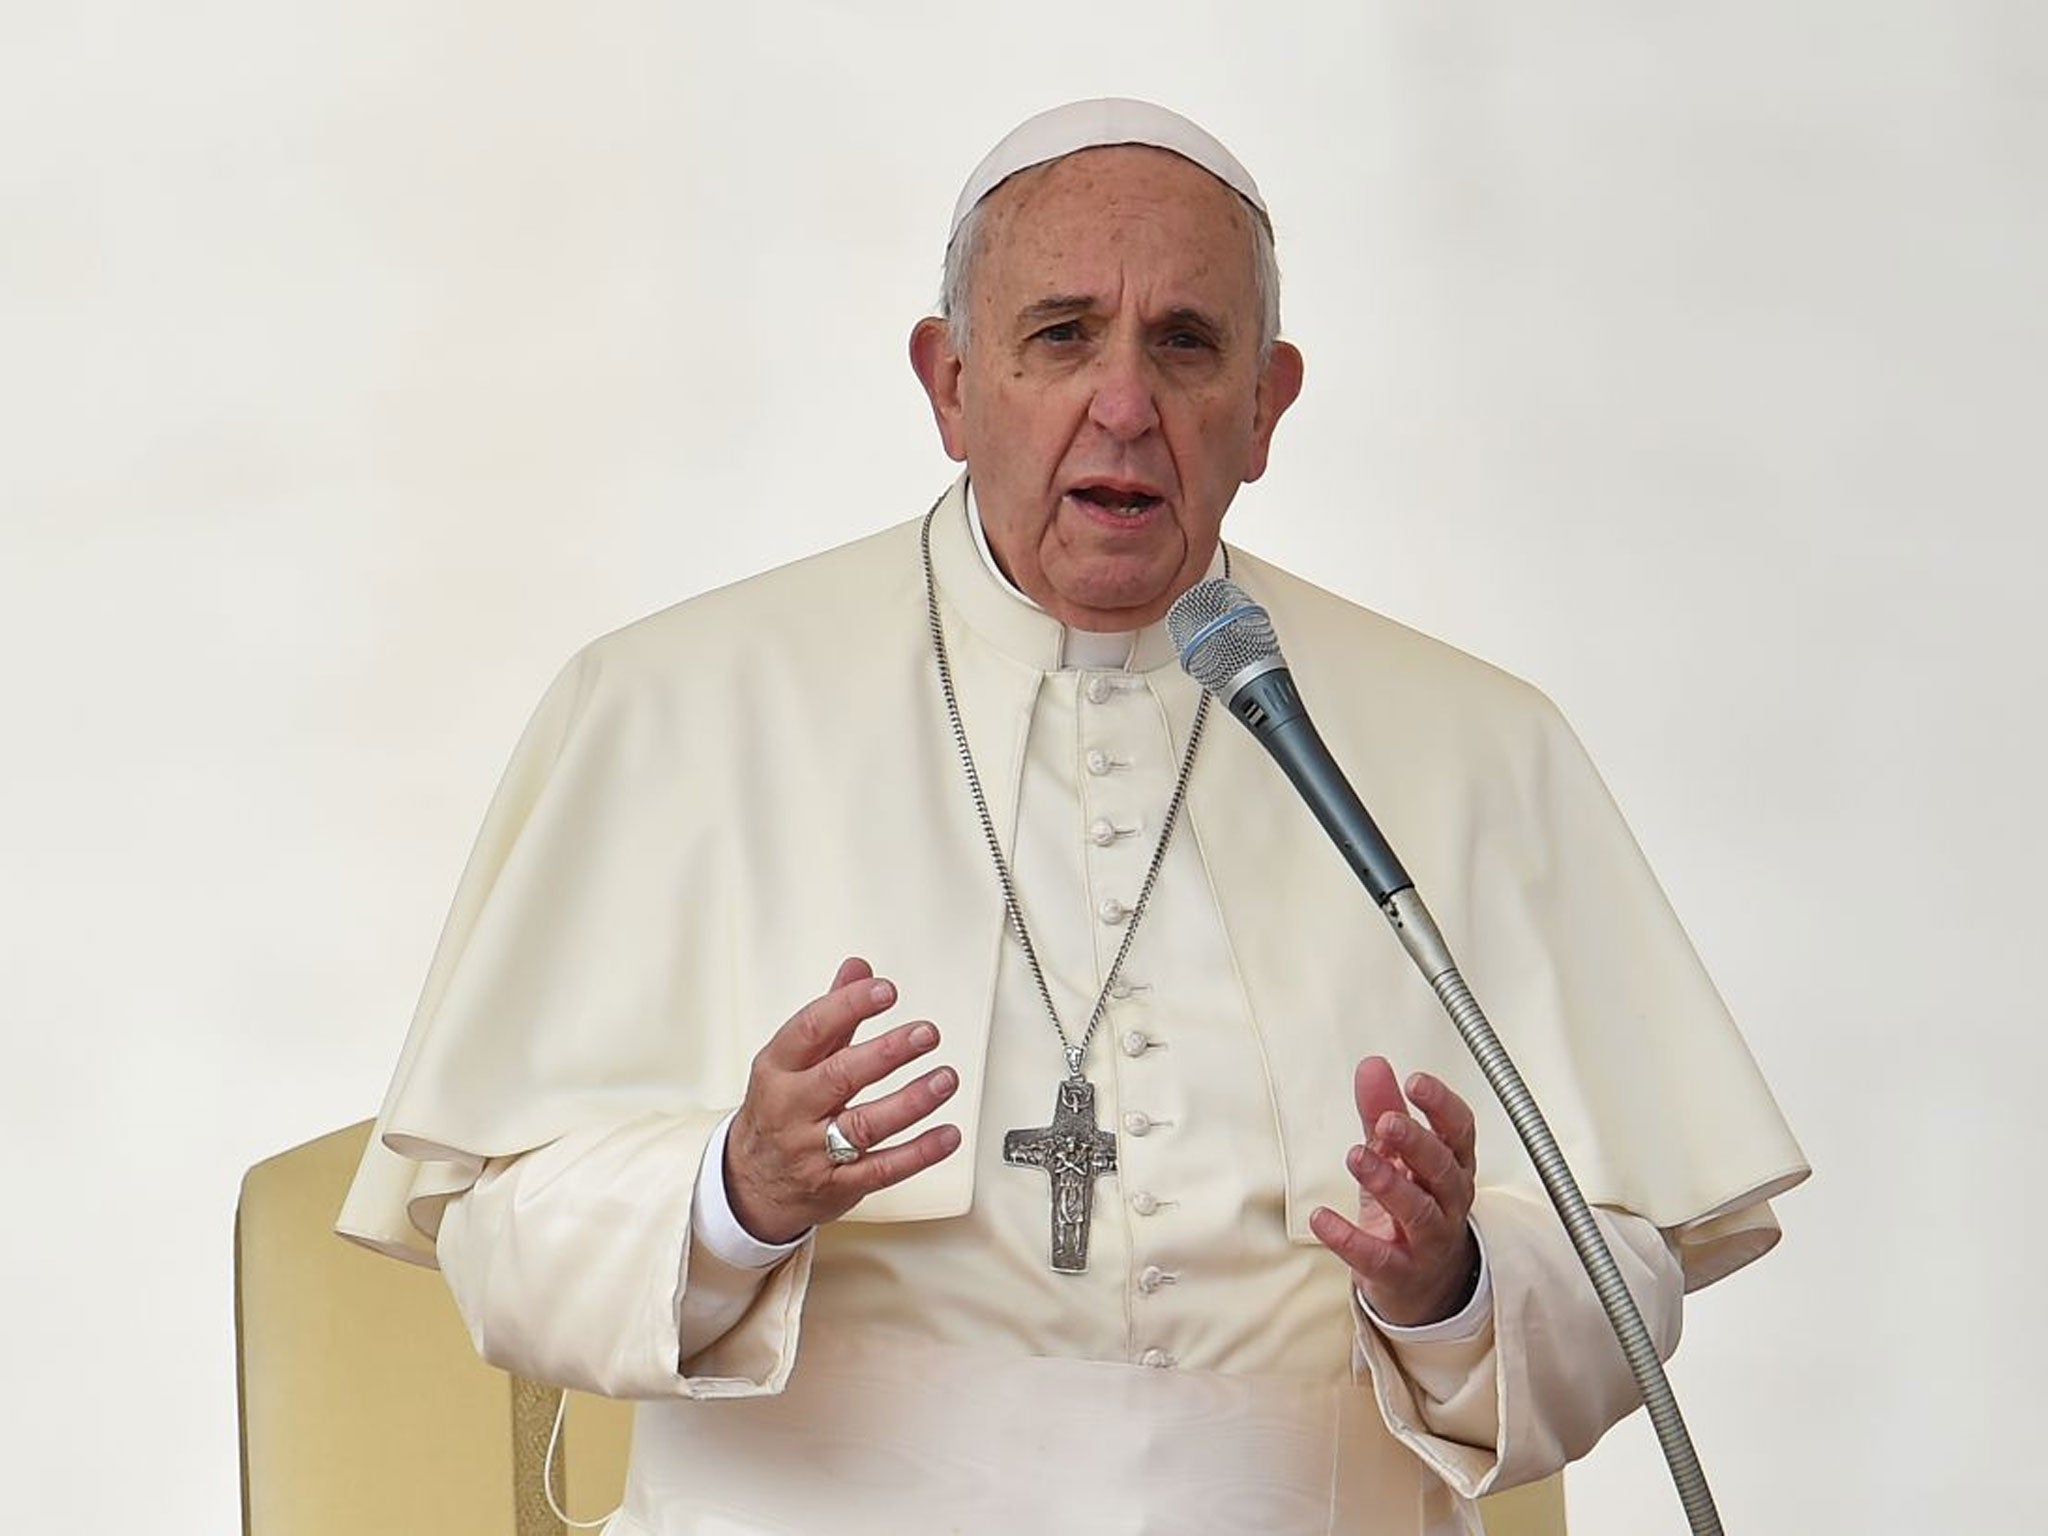 Pope Francis has said caring for the poor does not make him a communist